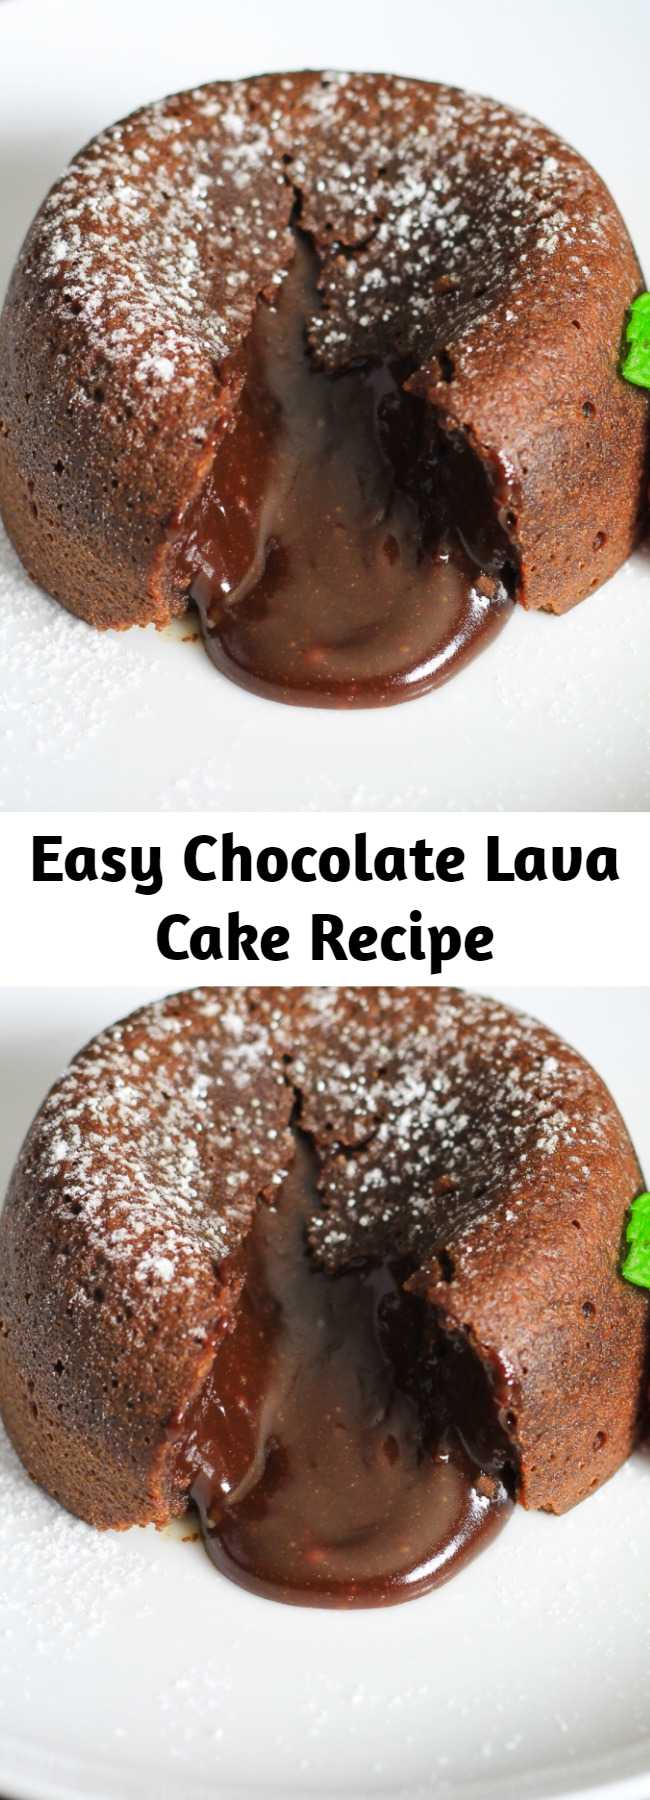 Easy Chocolate Lava Cake Recipe - This chocolate lava cake is so rich, fudgy, and downright indulgent. You won’t believe how easy this heavenly chocolate dessert is to make! Decadent molten chocolate lava cake that goes perfectly with a scoop of ice cream. 